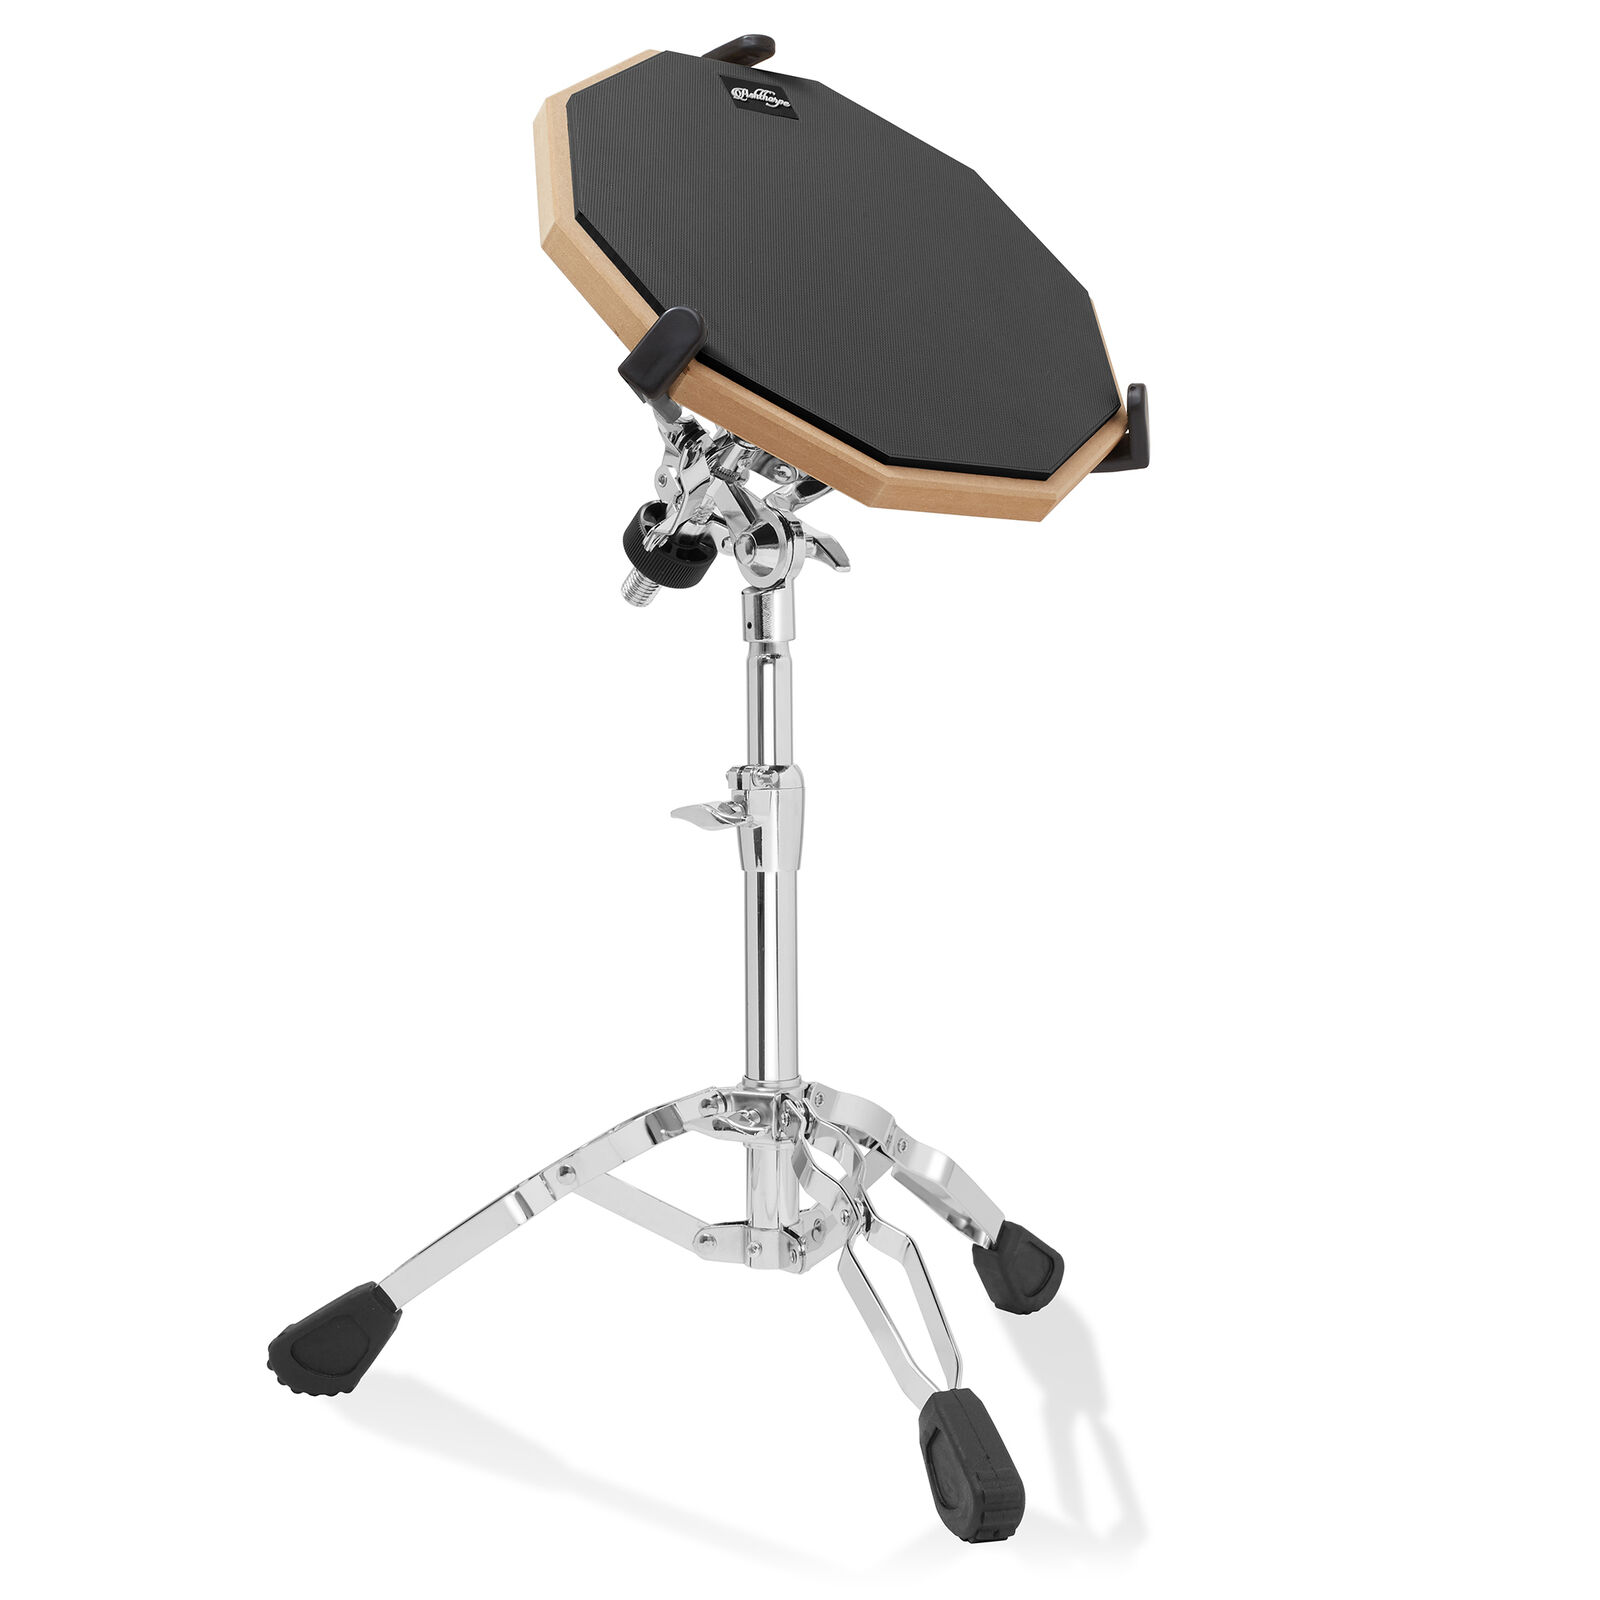 12″ Practice Pad Drum Set with Snare Stand, Carrying Bag, Drumsticks 4